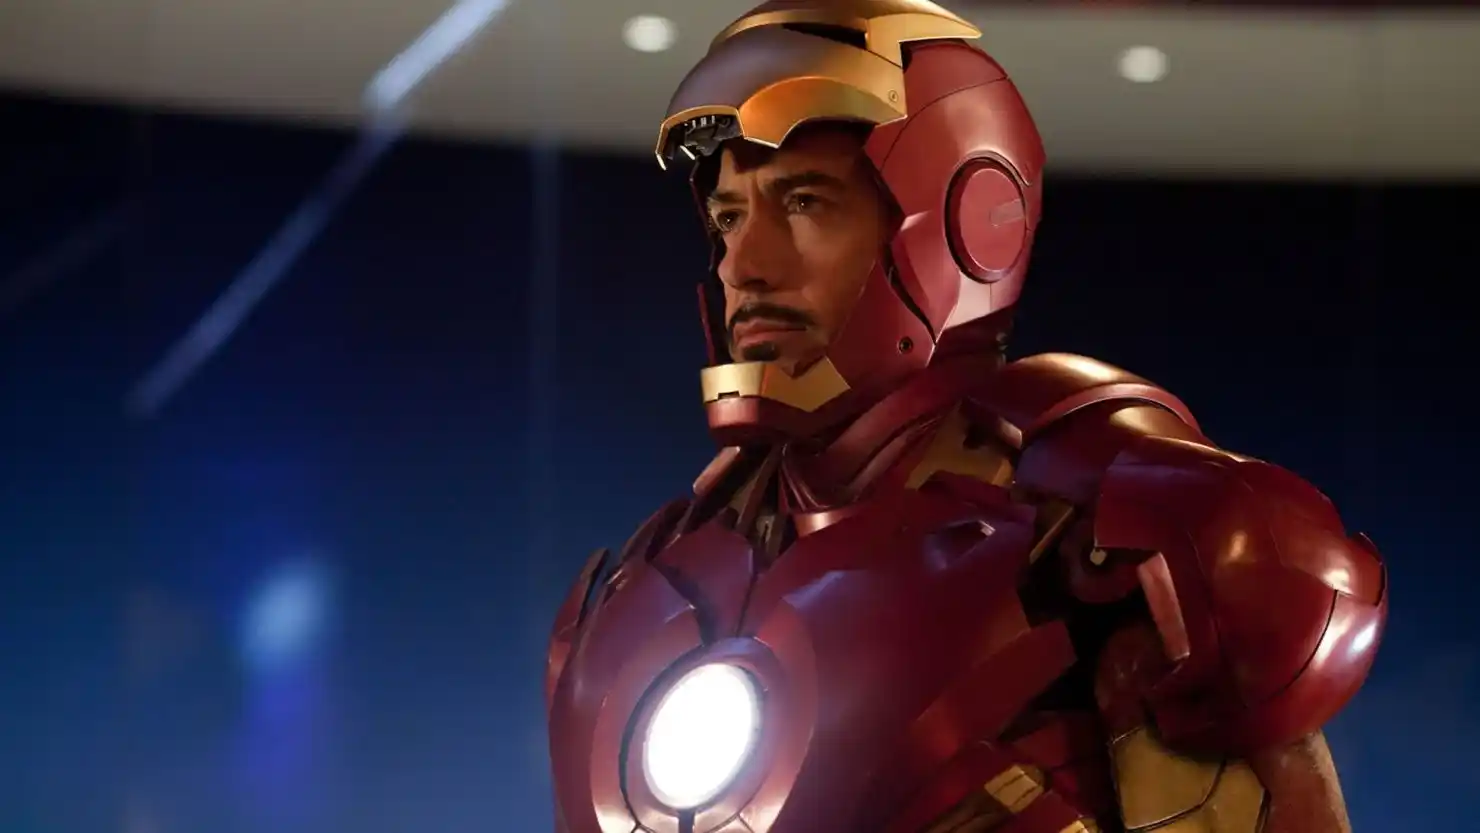 Robert Downey Jr. was replaced as Mick Wingert's Iron Man voice, which is explained below